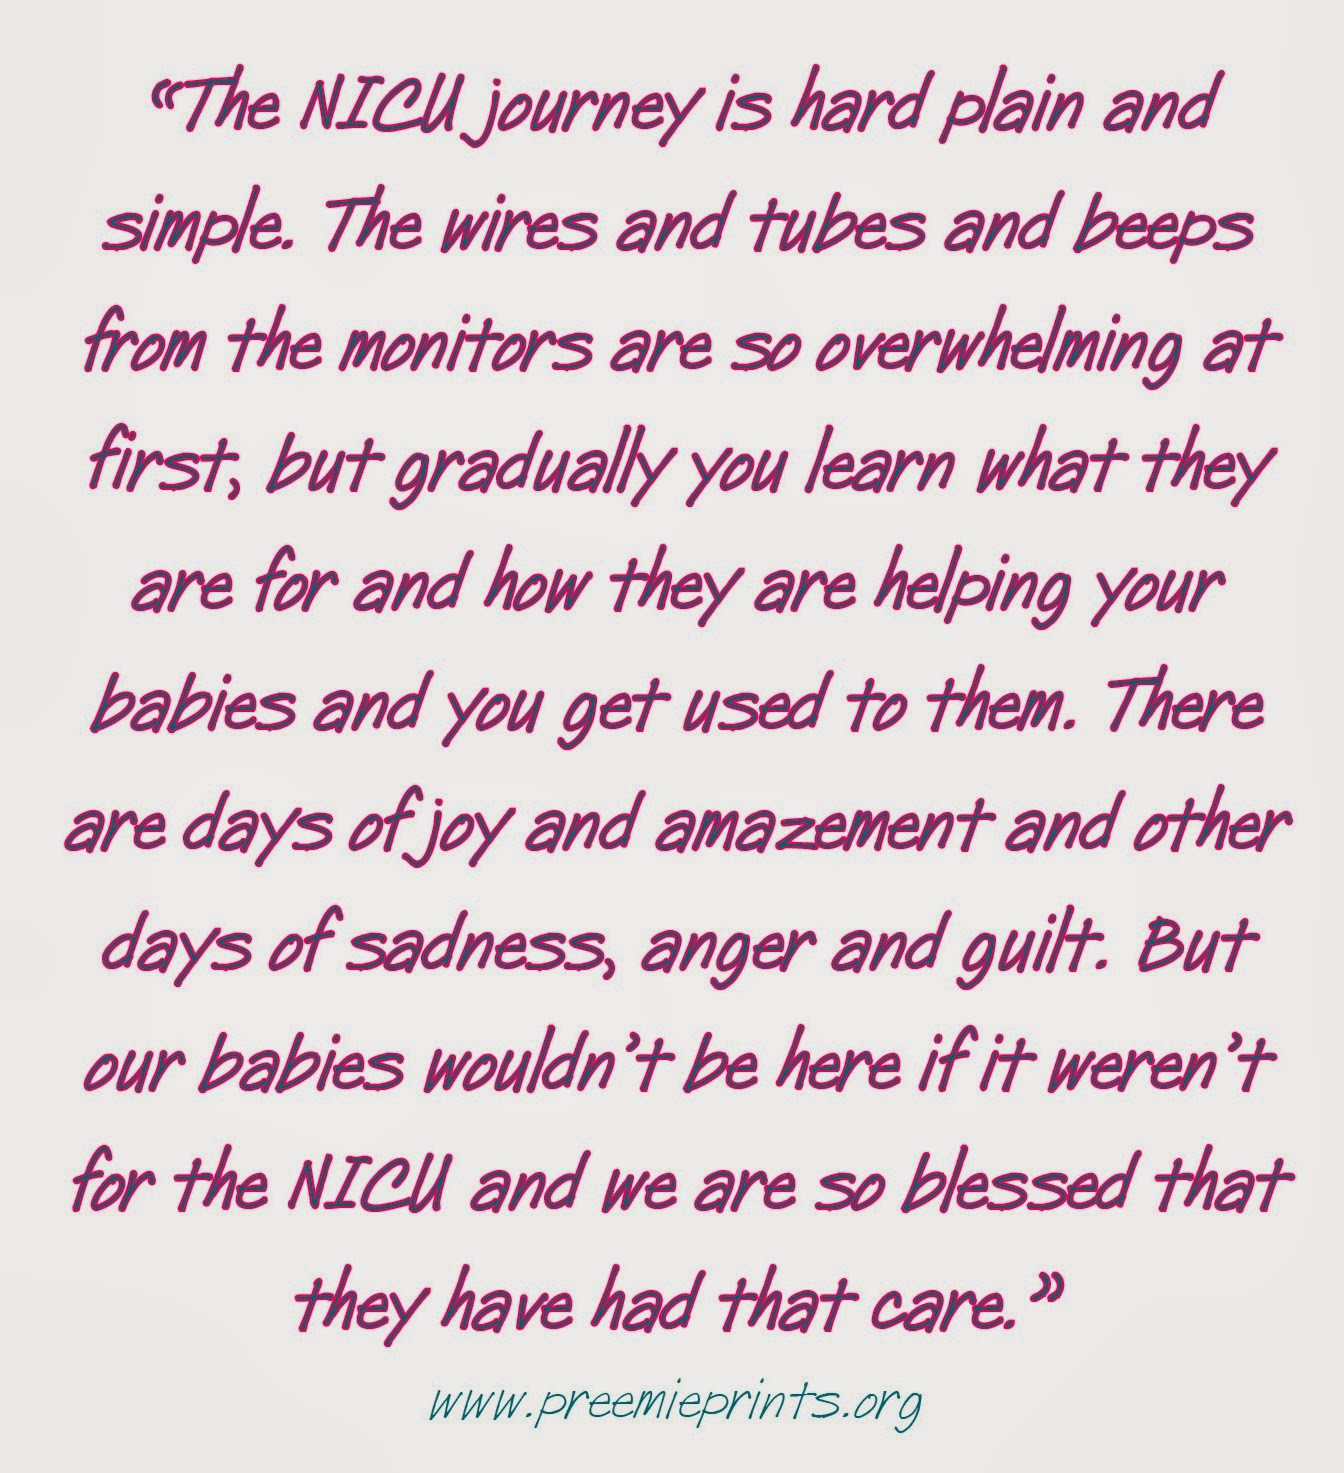 Premature Baby Quotes And Poems
 Nicu Poems